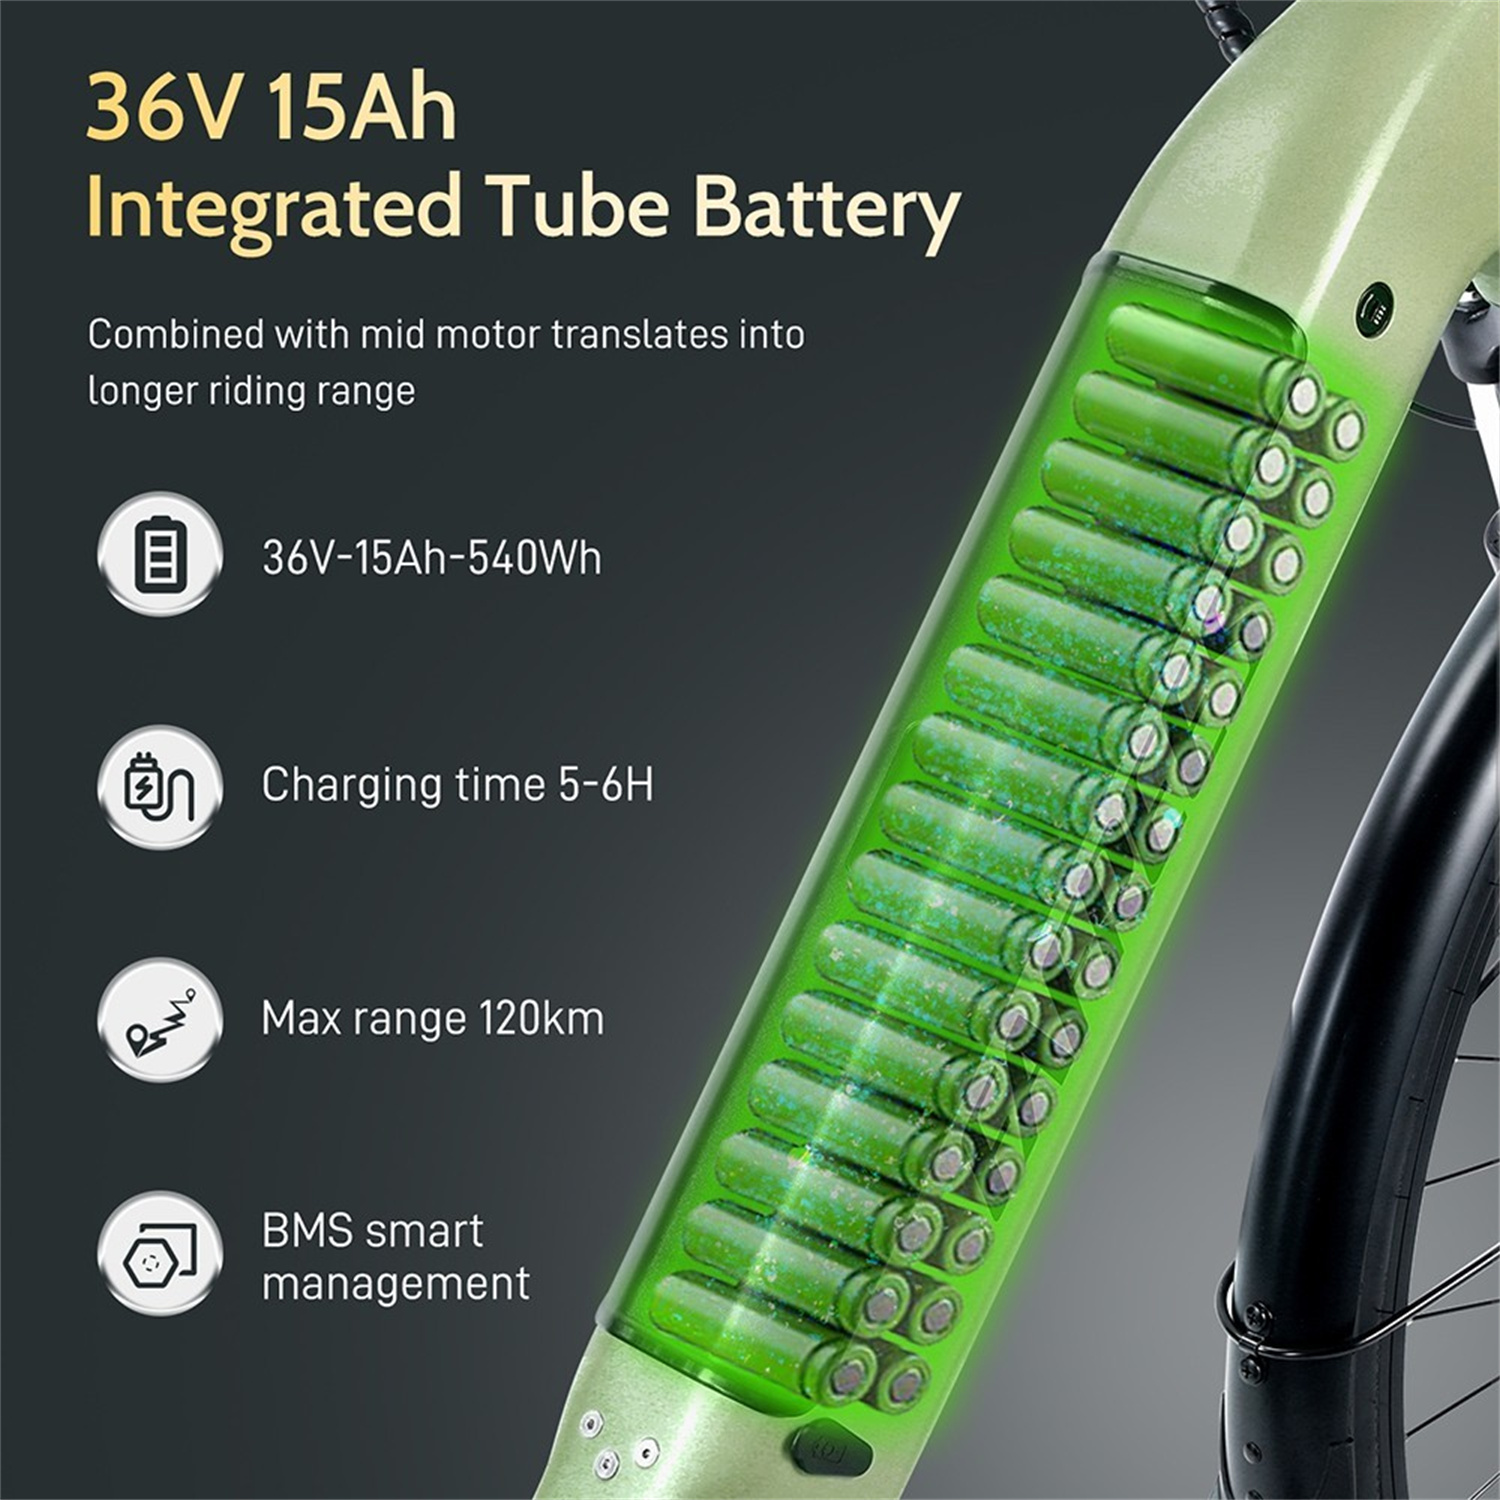 15ah Integrated Tube Battery